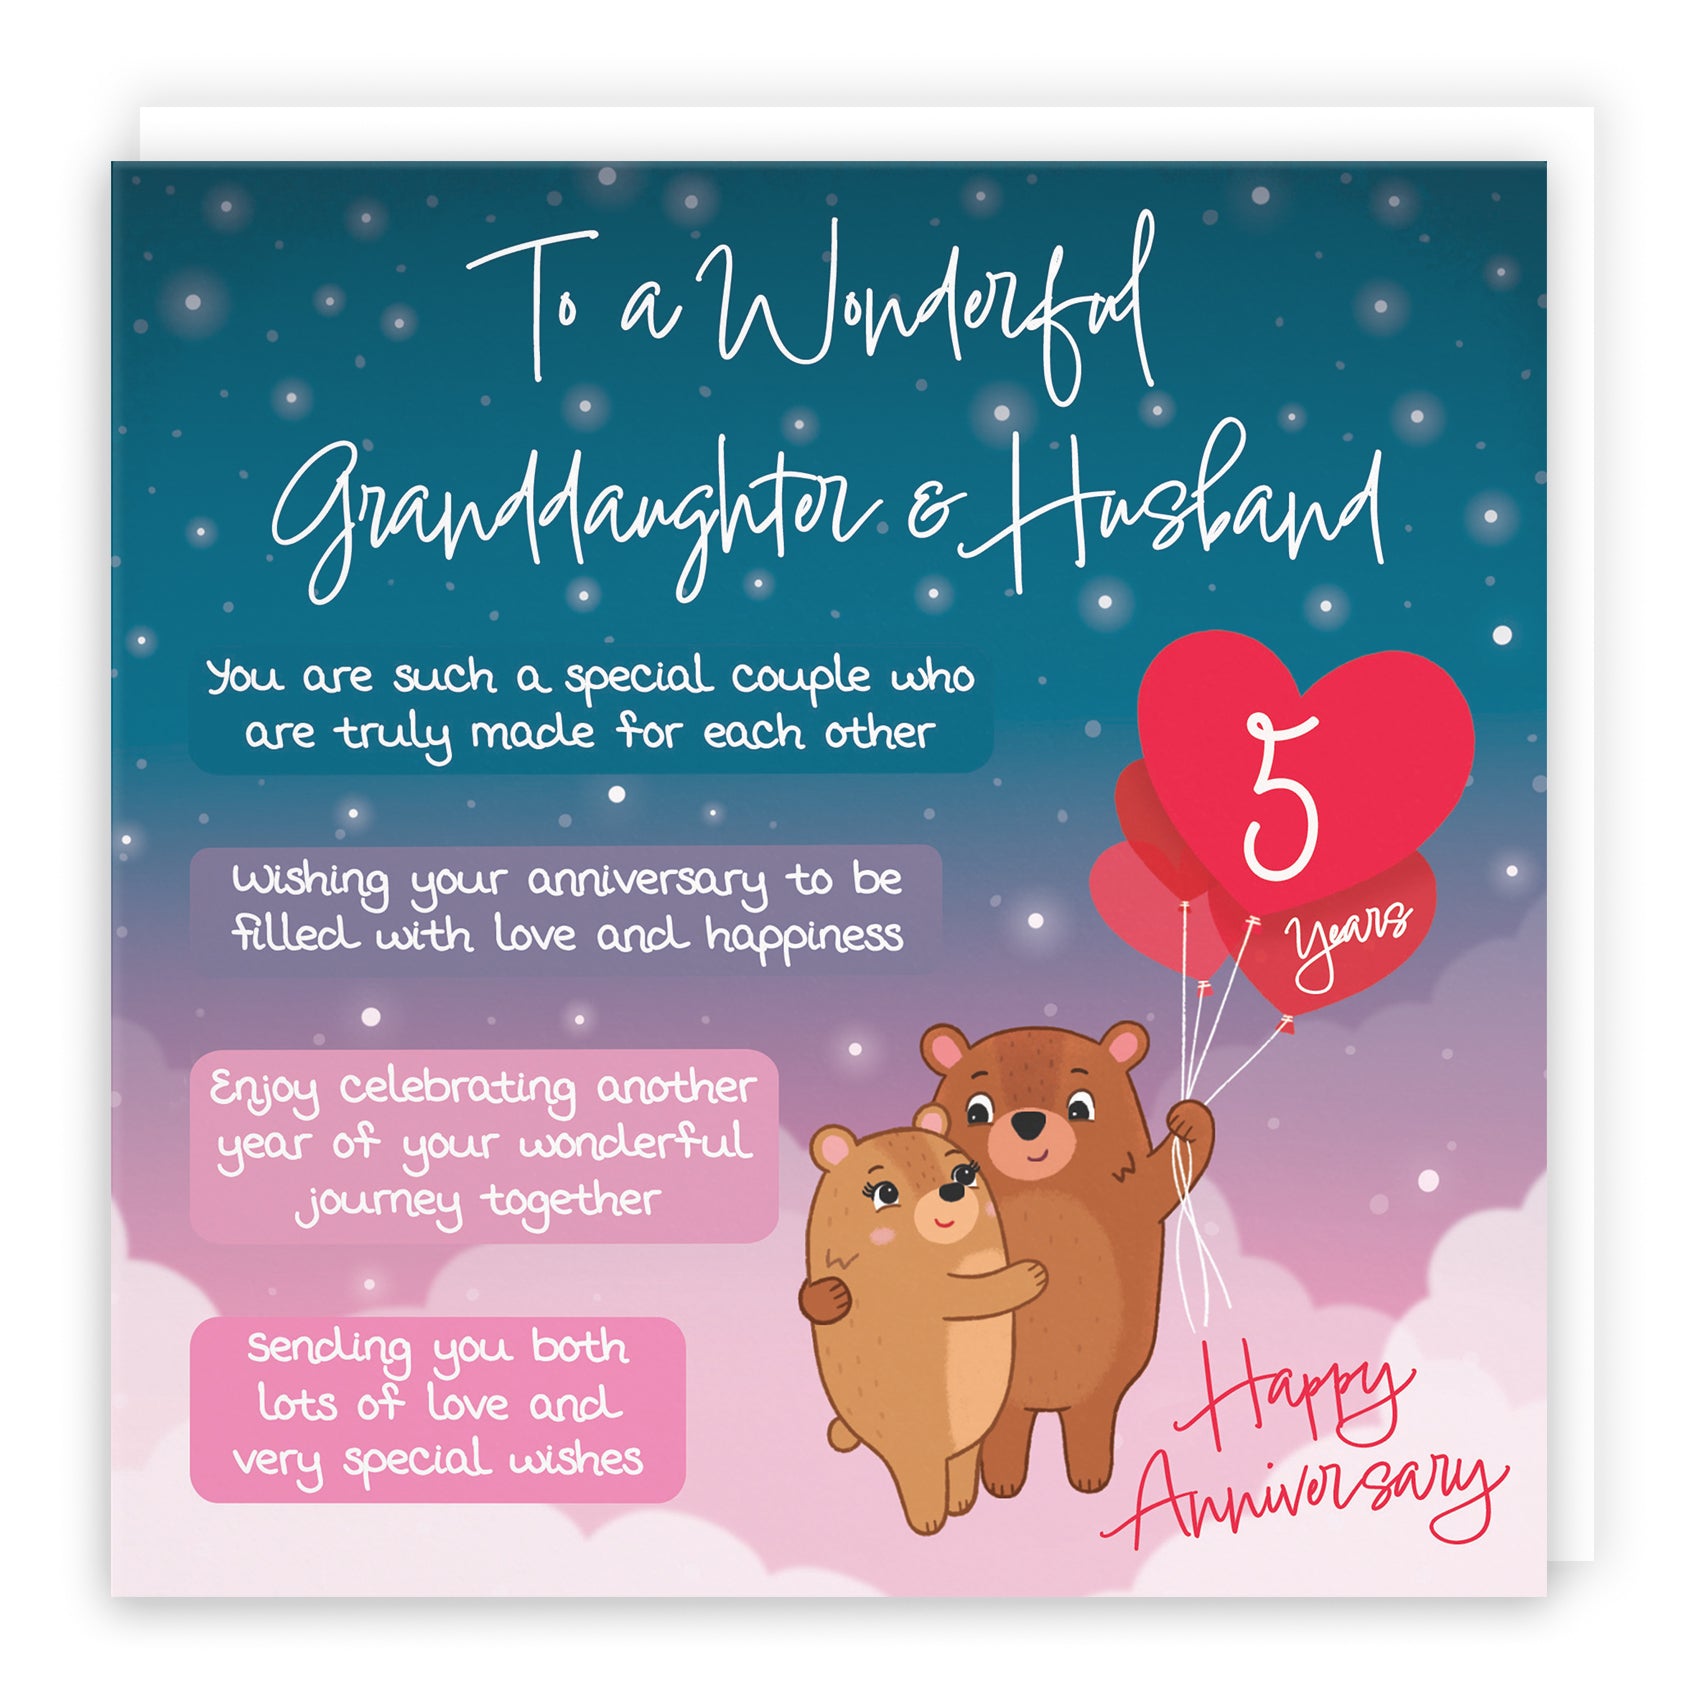 Granddaughter And Husband 5th Anniversary Card Starry Night Cute Bears